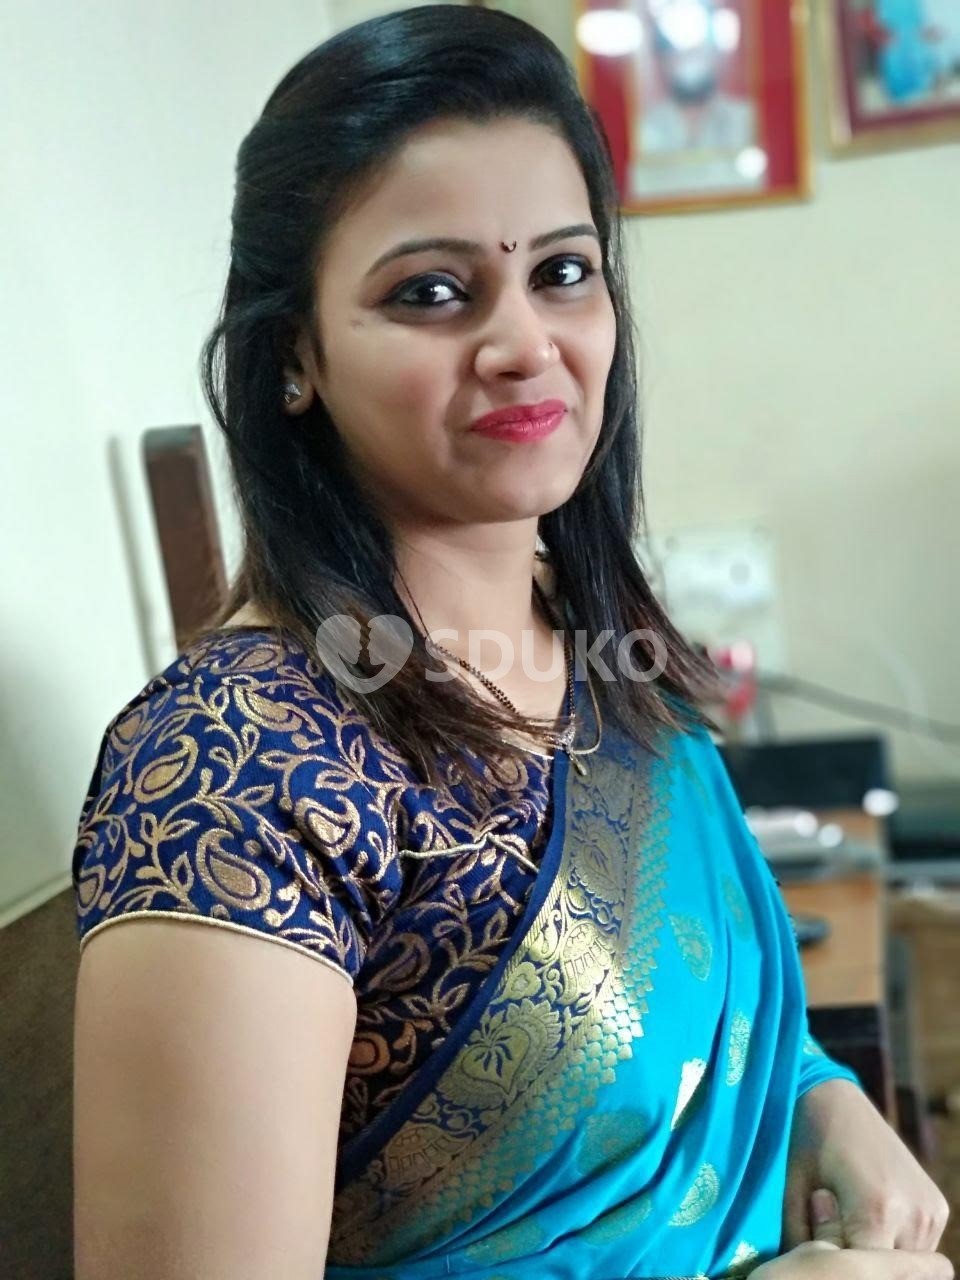 Kr Puram.......low price 🥰100% SAFE AND SECURE TODAY LOW PRICE UNLIMITED ENJOY HOT COLLEGE GIRL HOUSEWIFE AUNTIES AVA